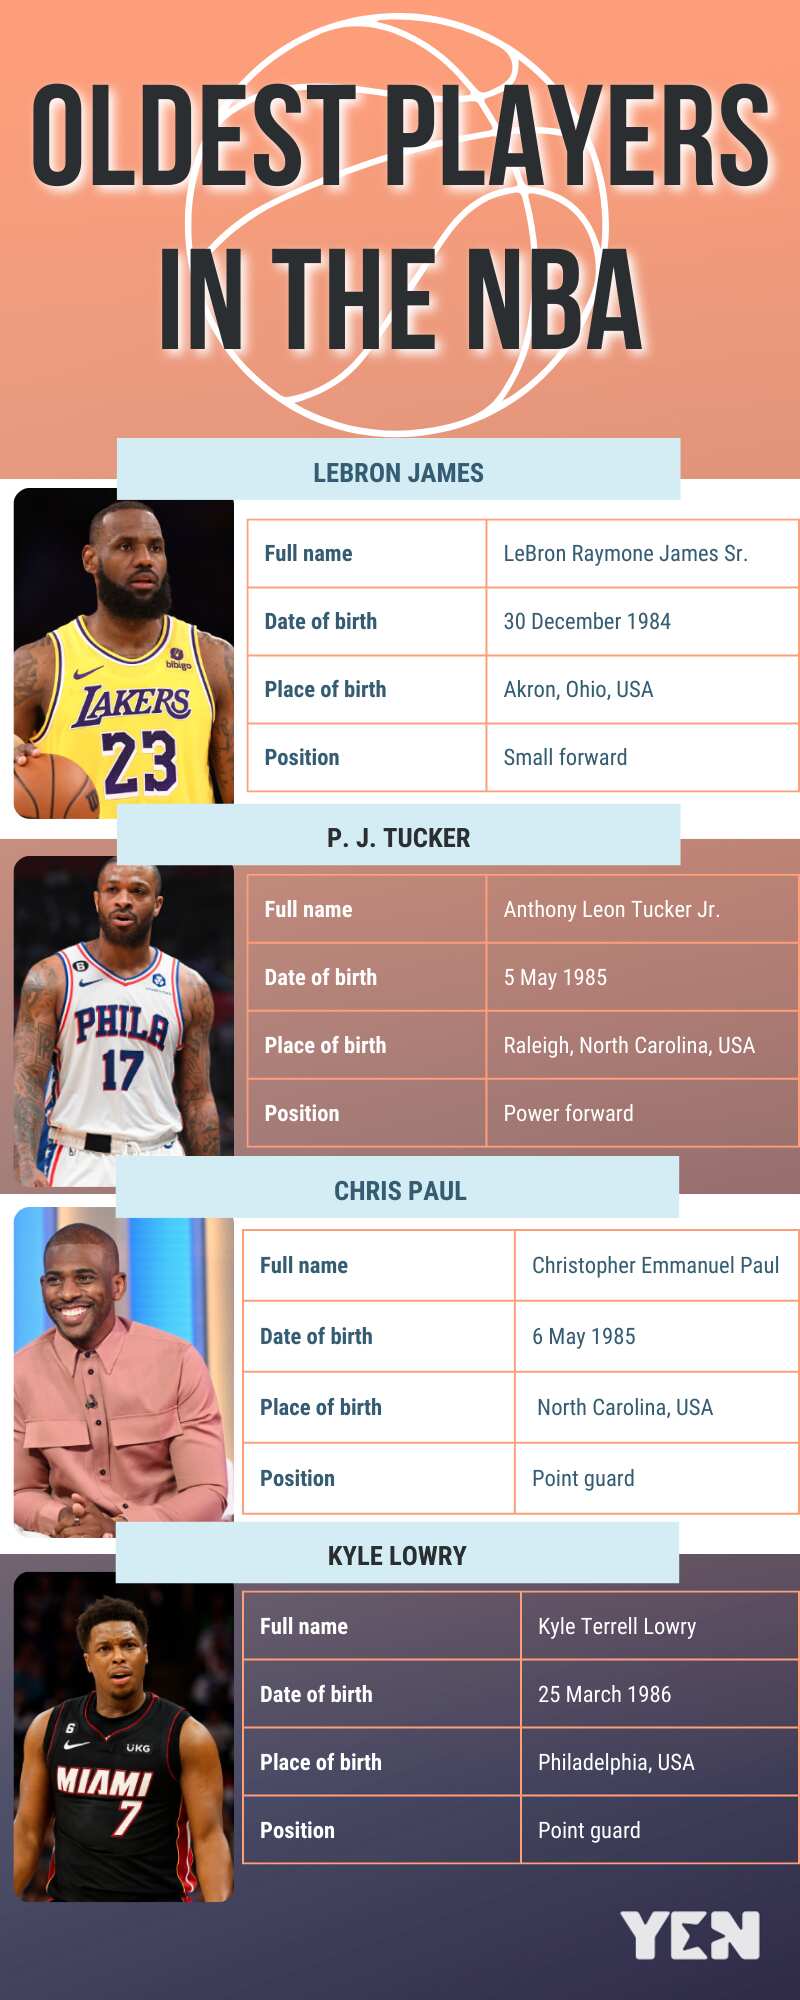 Oldest players in the NBA